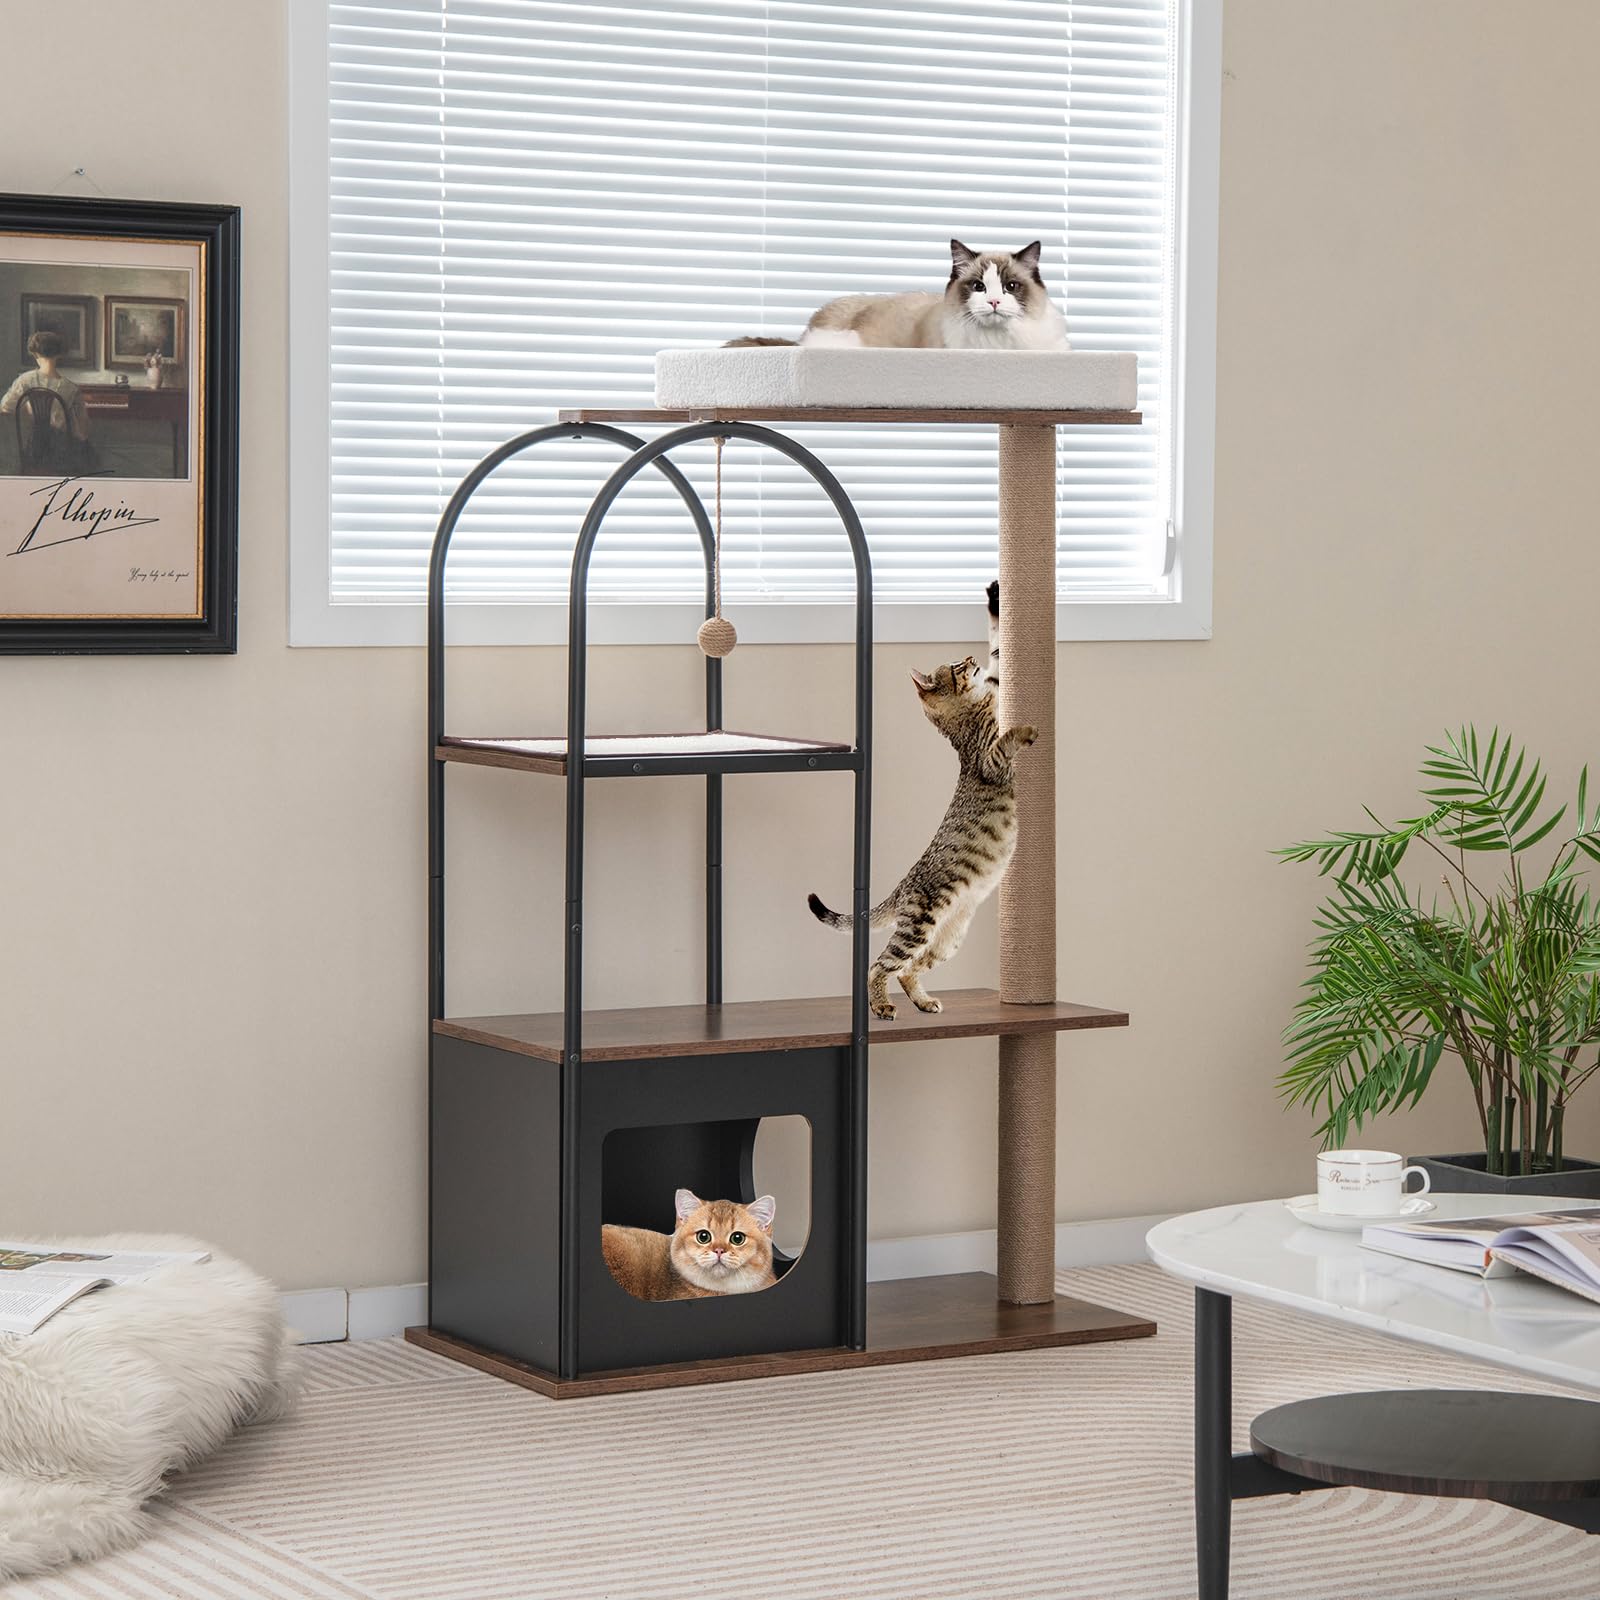 Tangkula Cat Tree Tower, 47 Inch Modern Cat Tree with Metal Frame, Top Perch Cat Bed